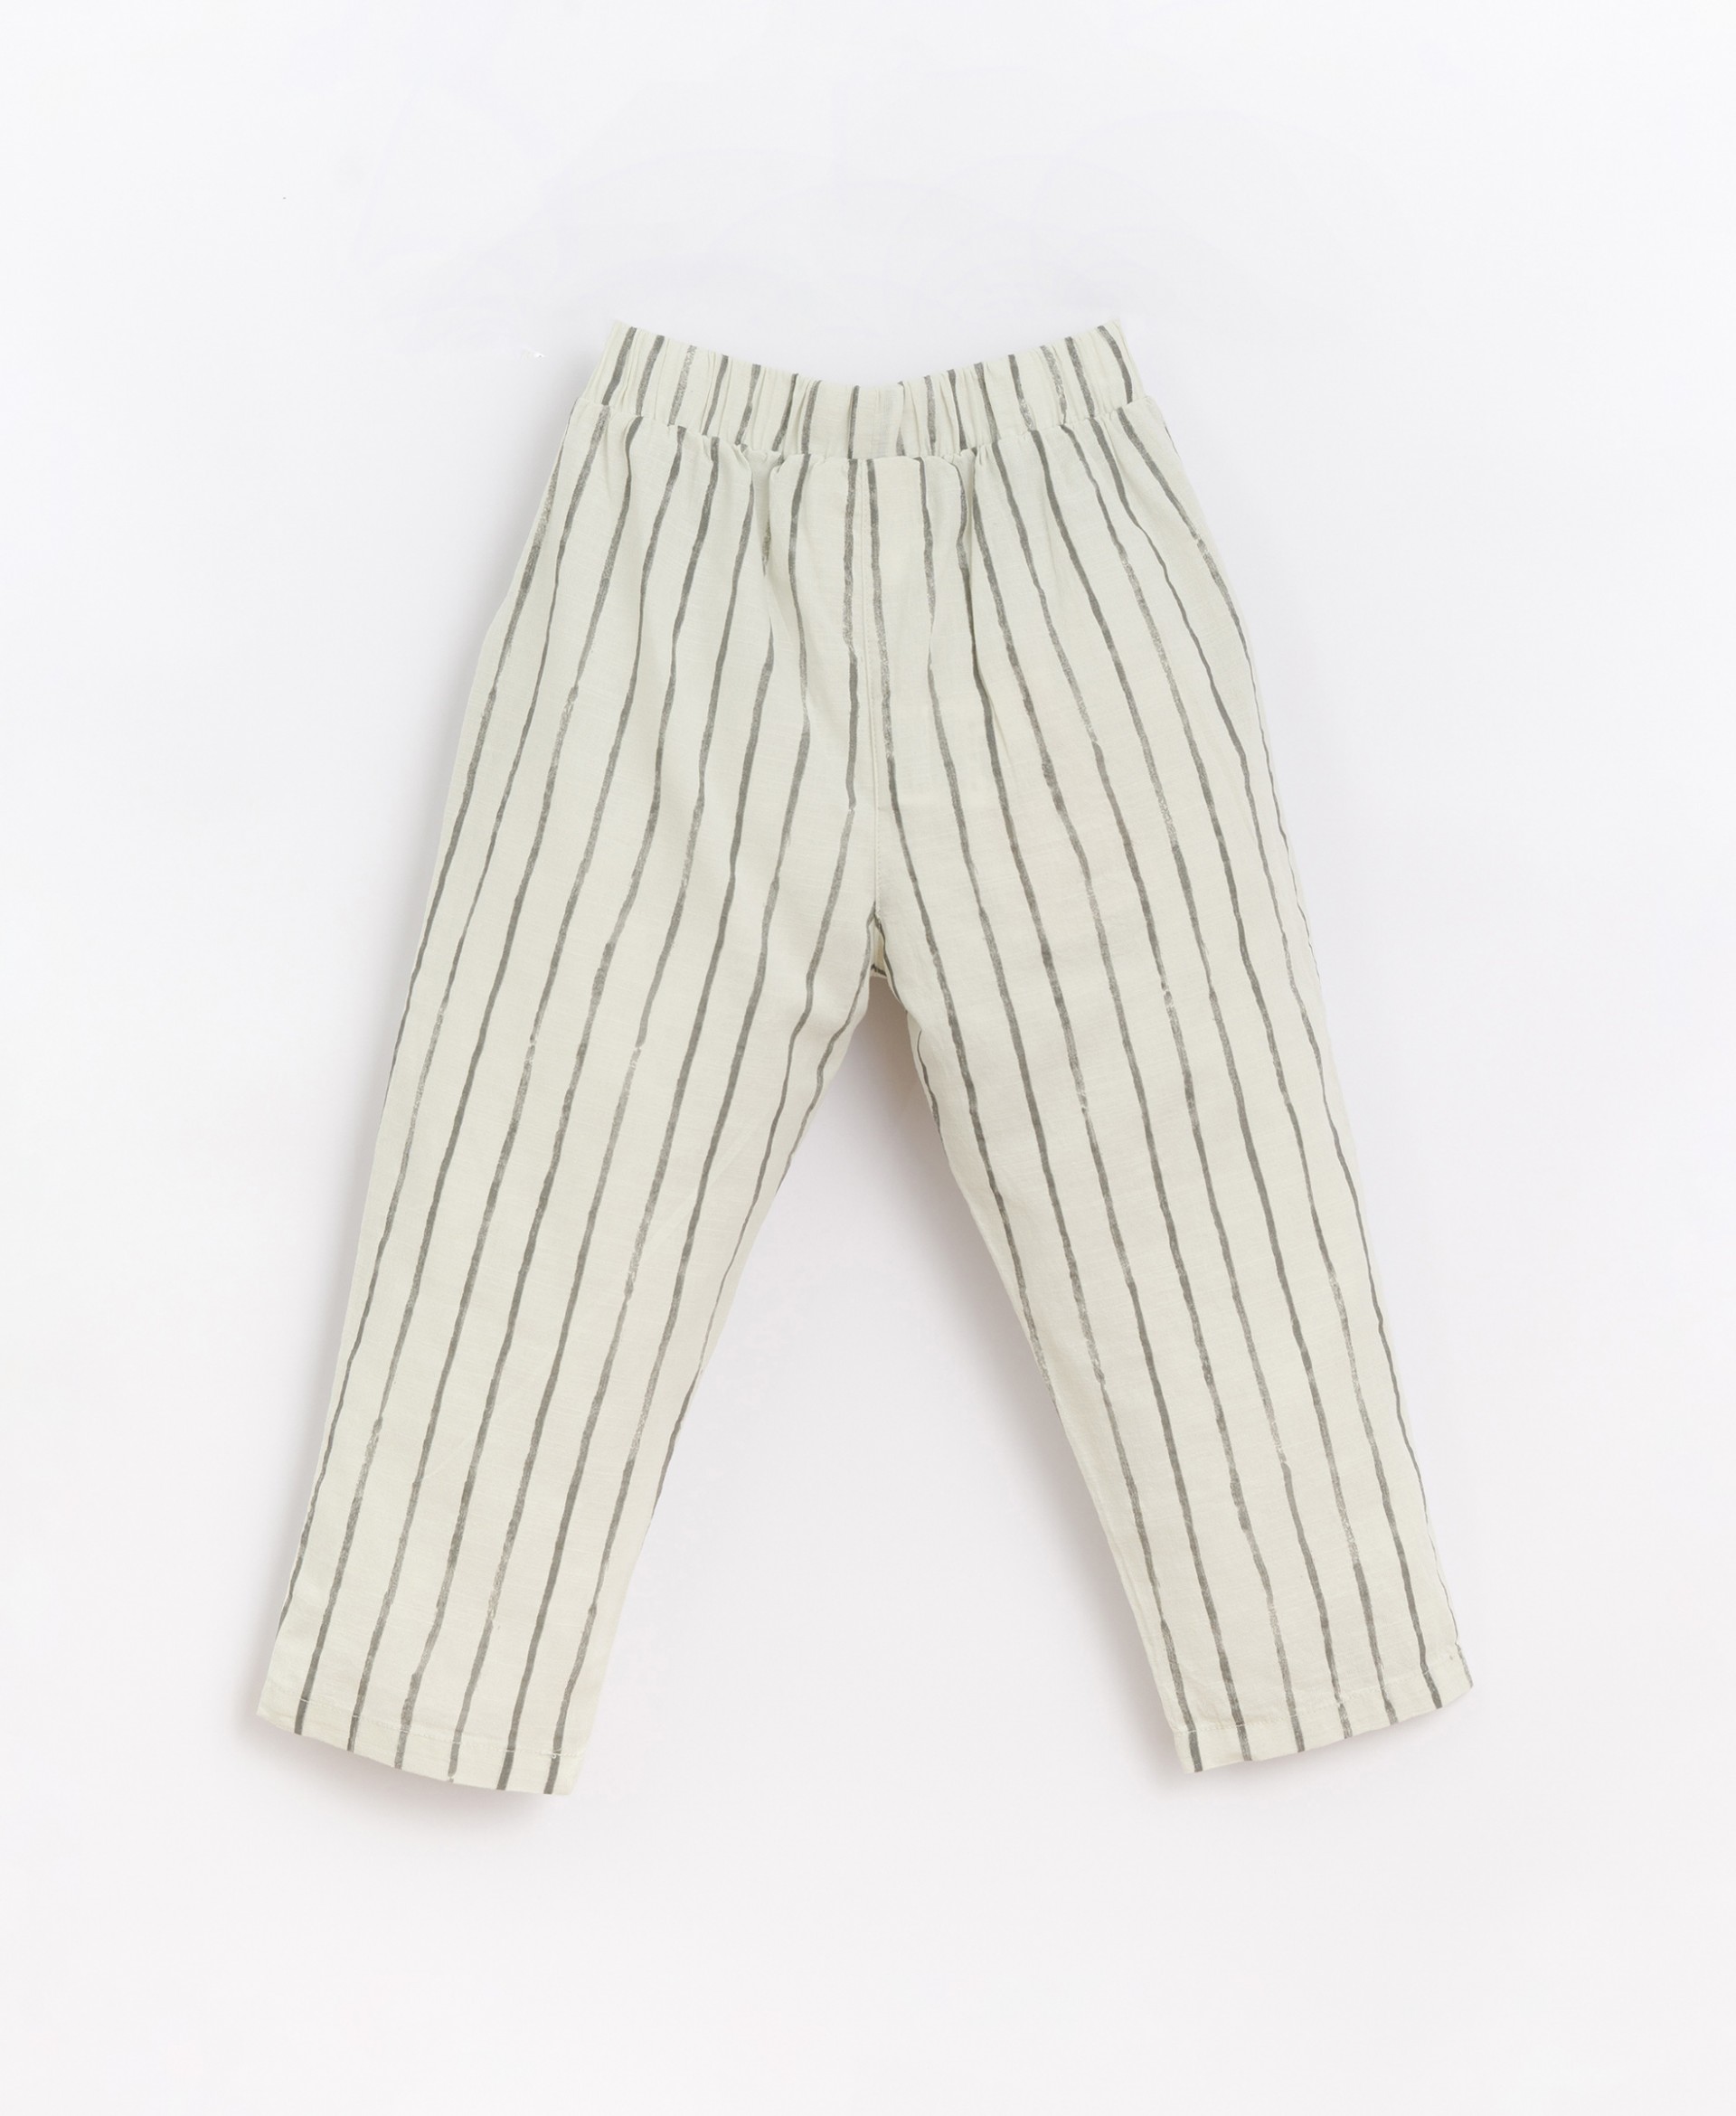 Pants in striped fabric | Basketry